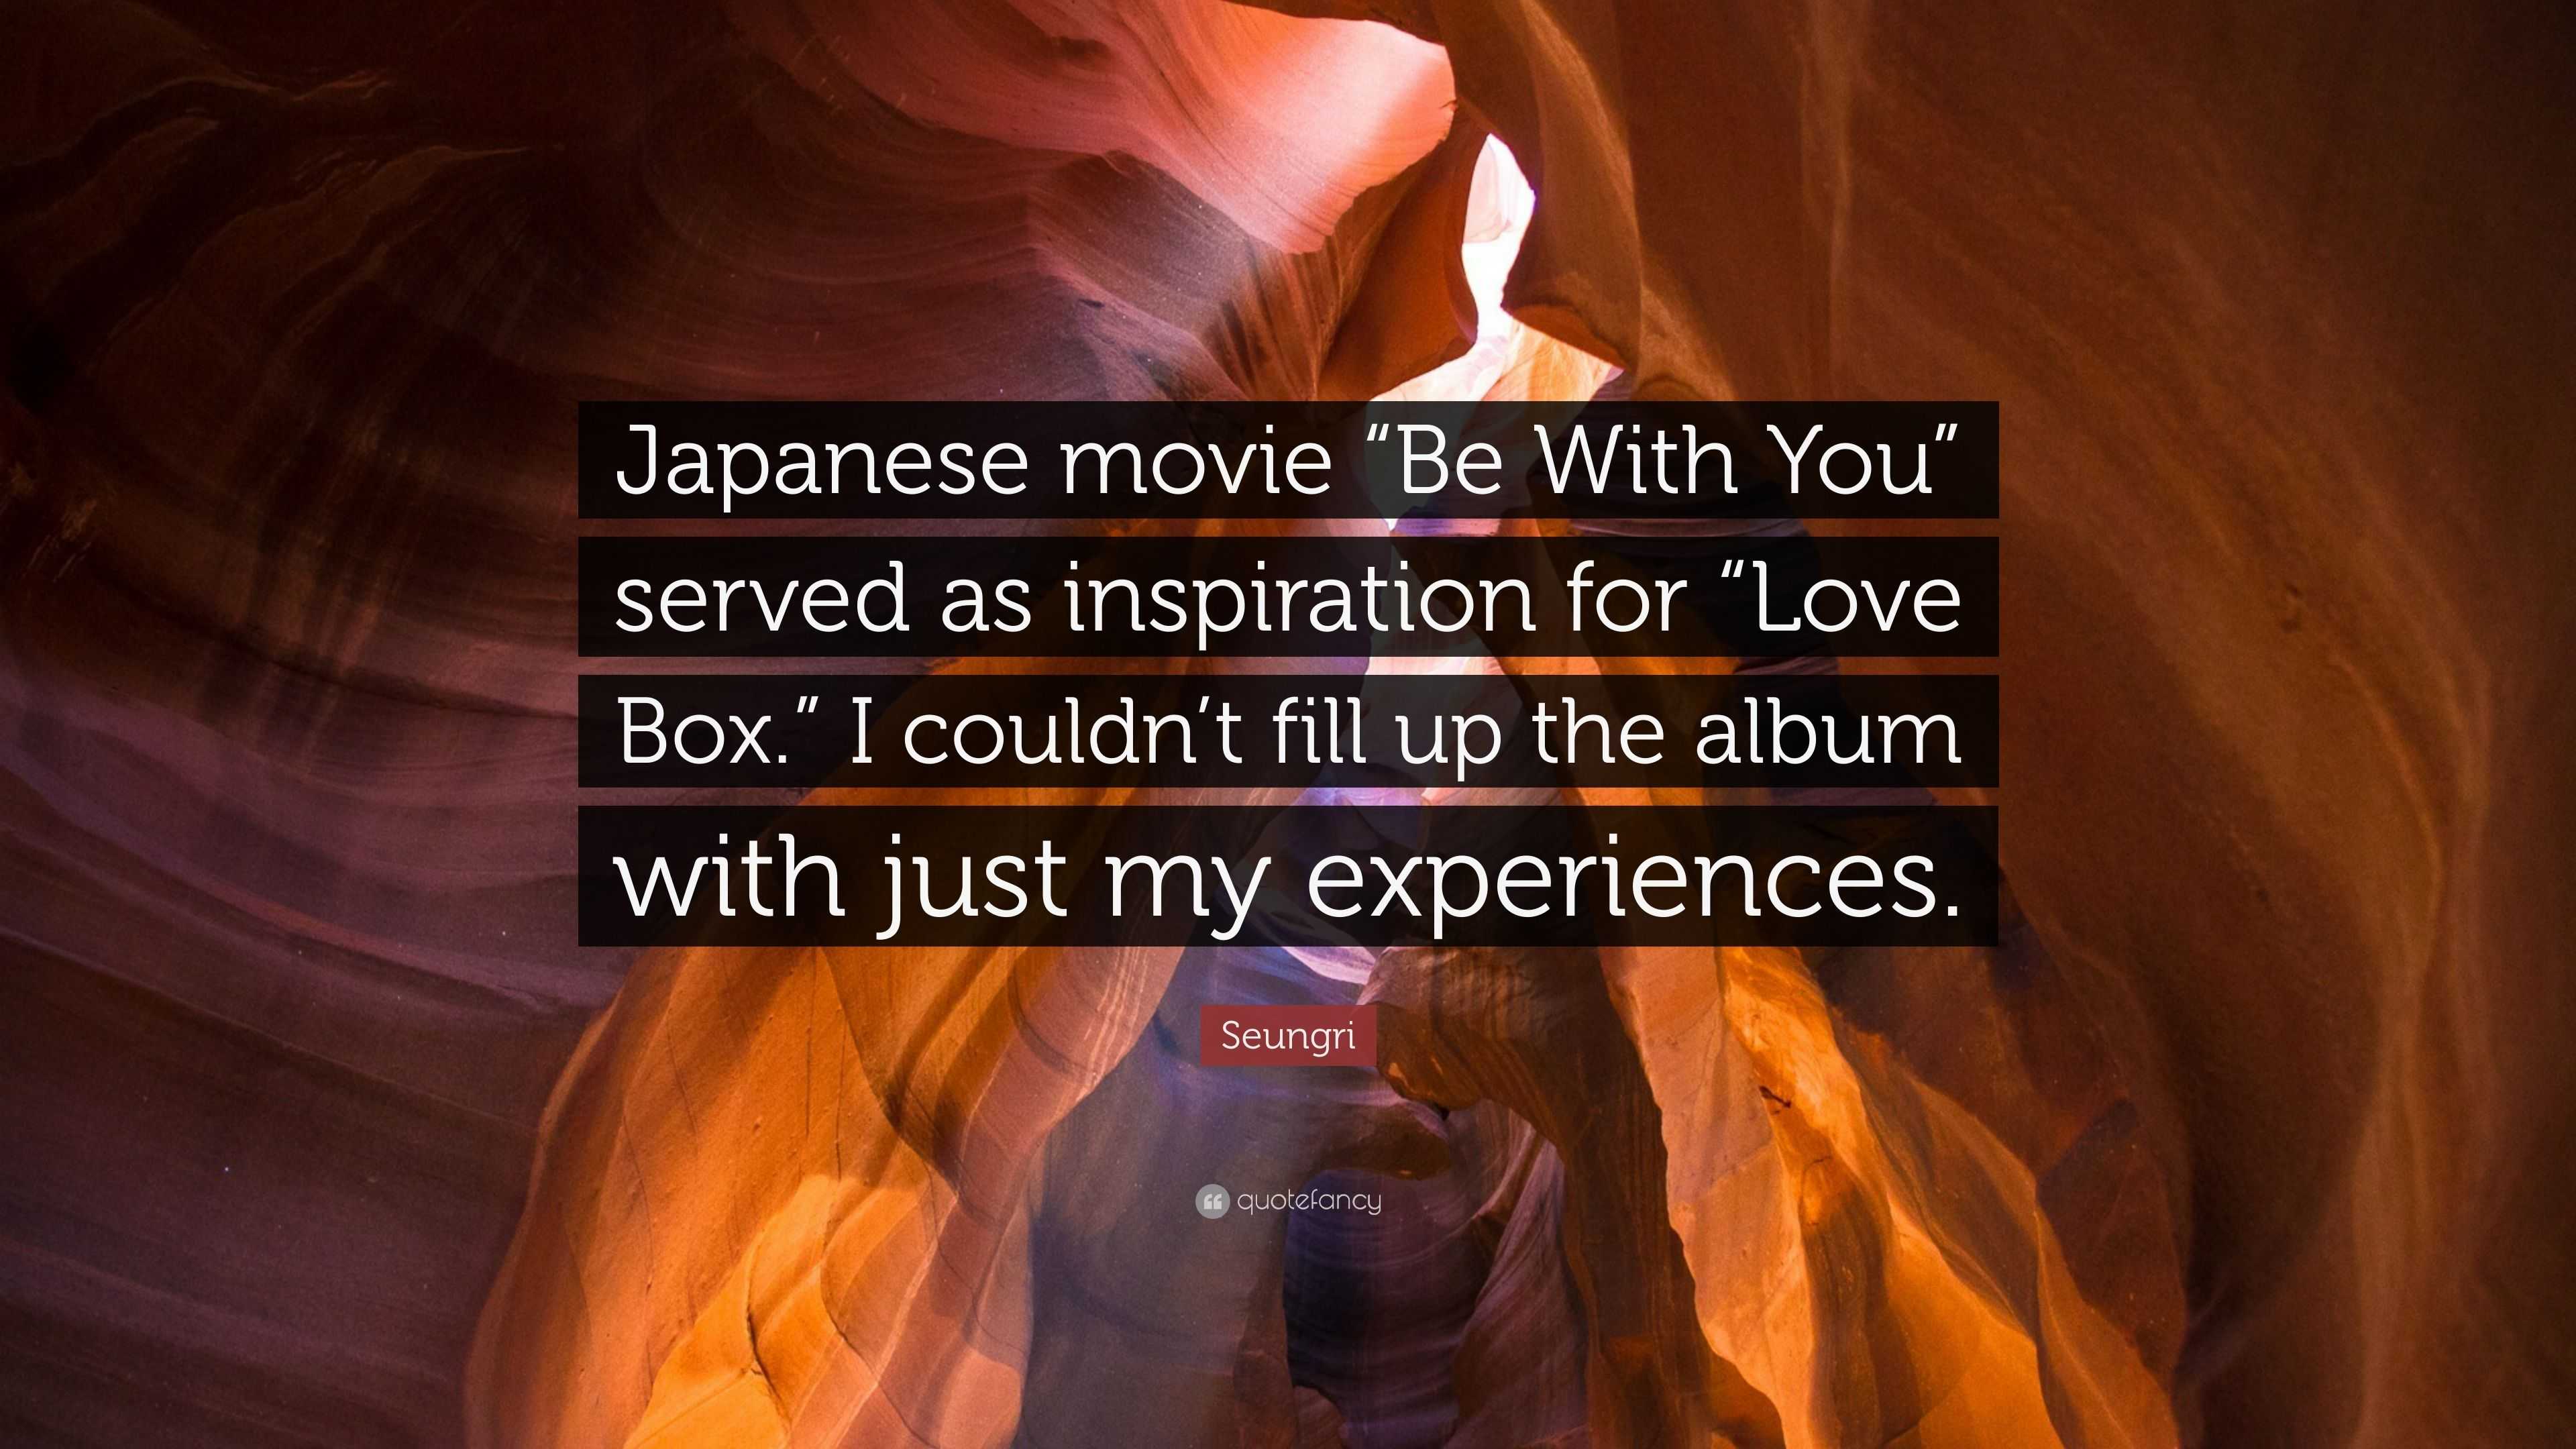 Seungri Quote “Japanese movie “Be With You” served as inspiration for “